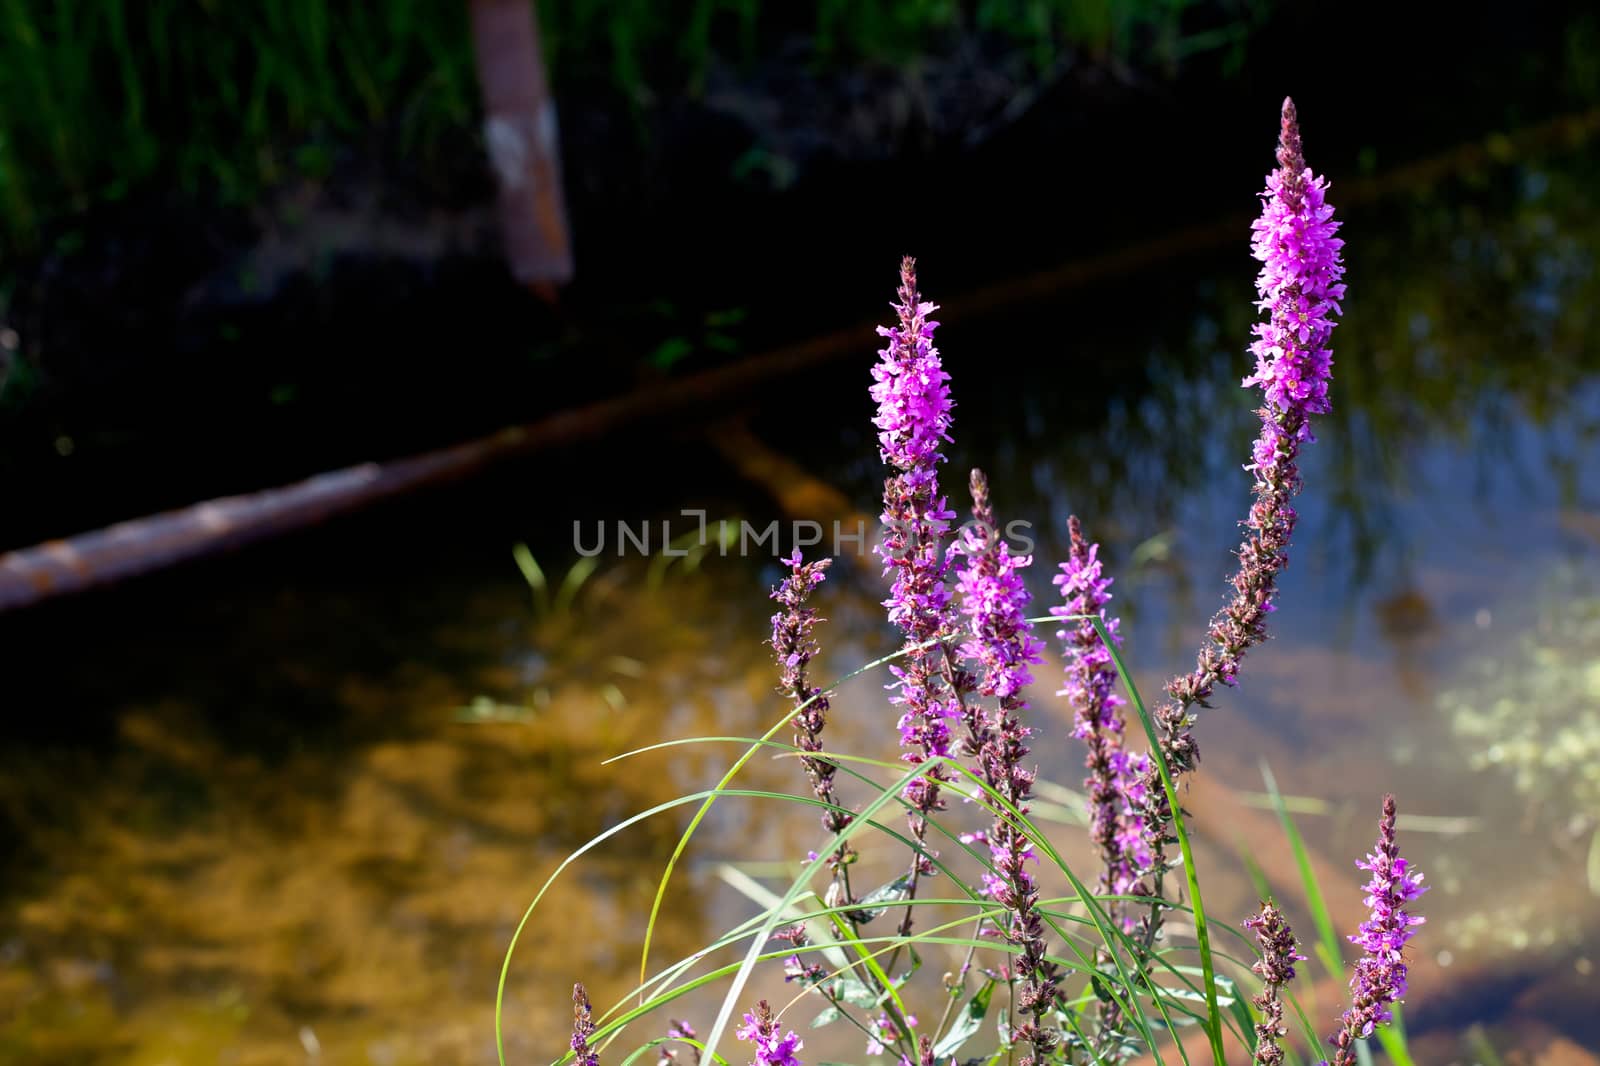 Lilac wildflowers in front of water in sunny day
